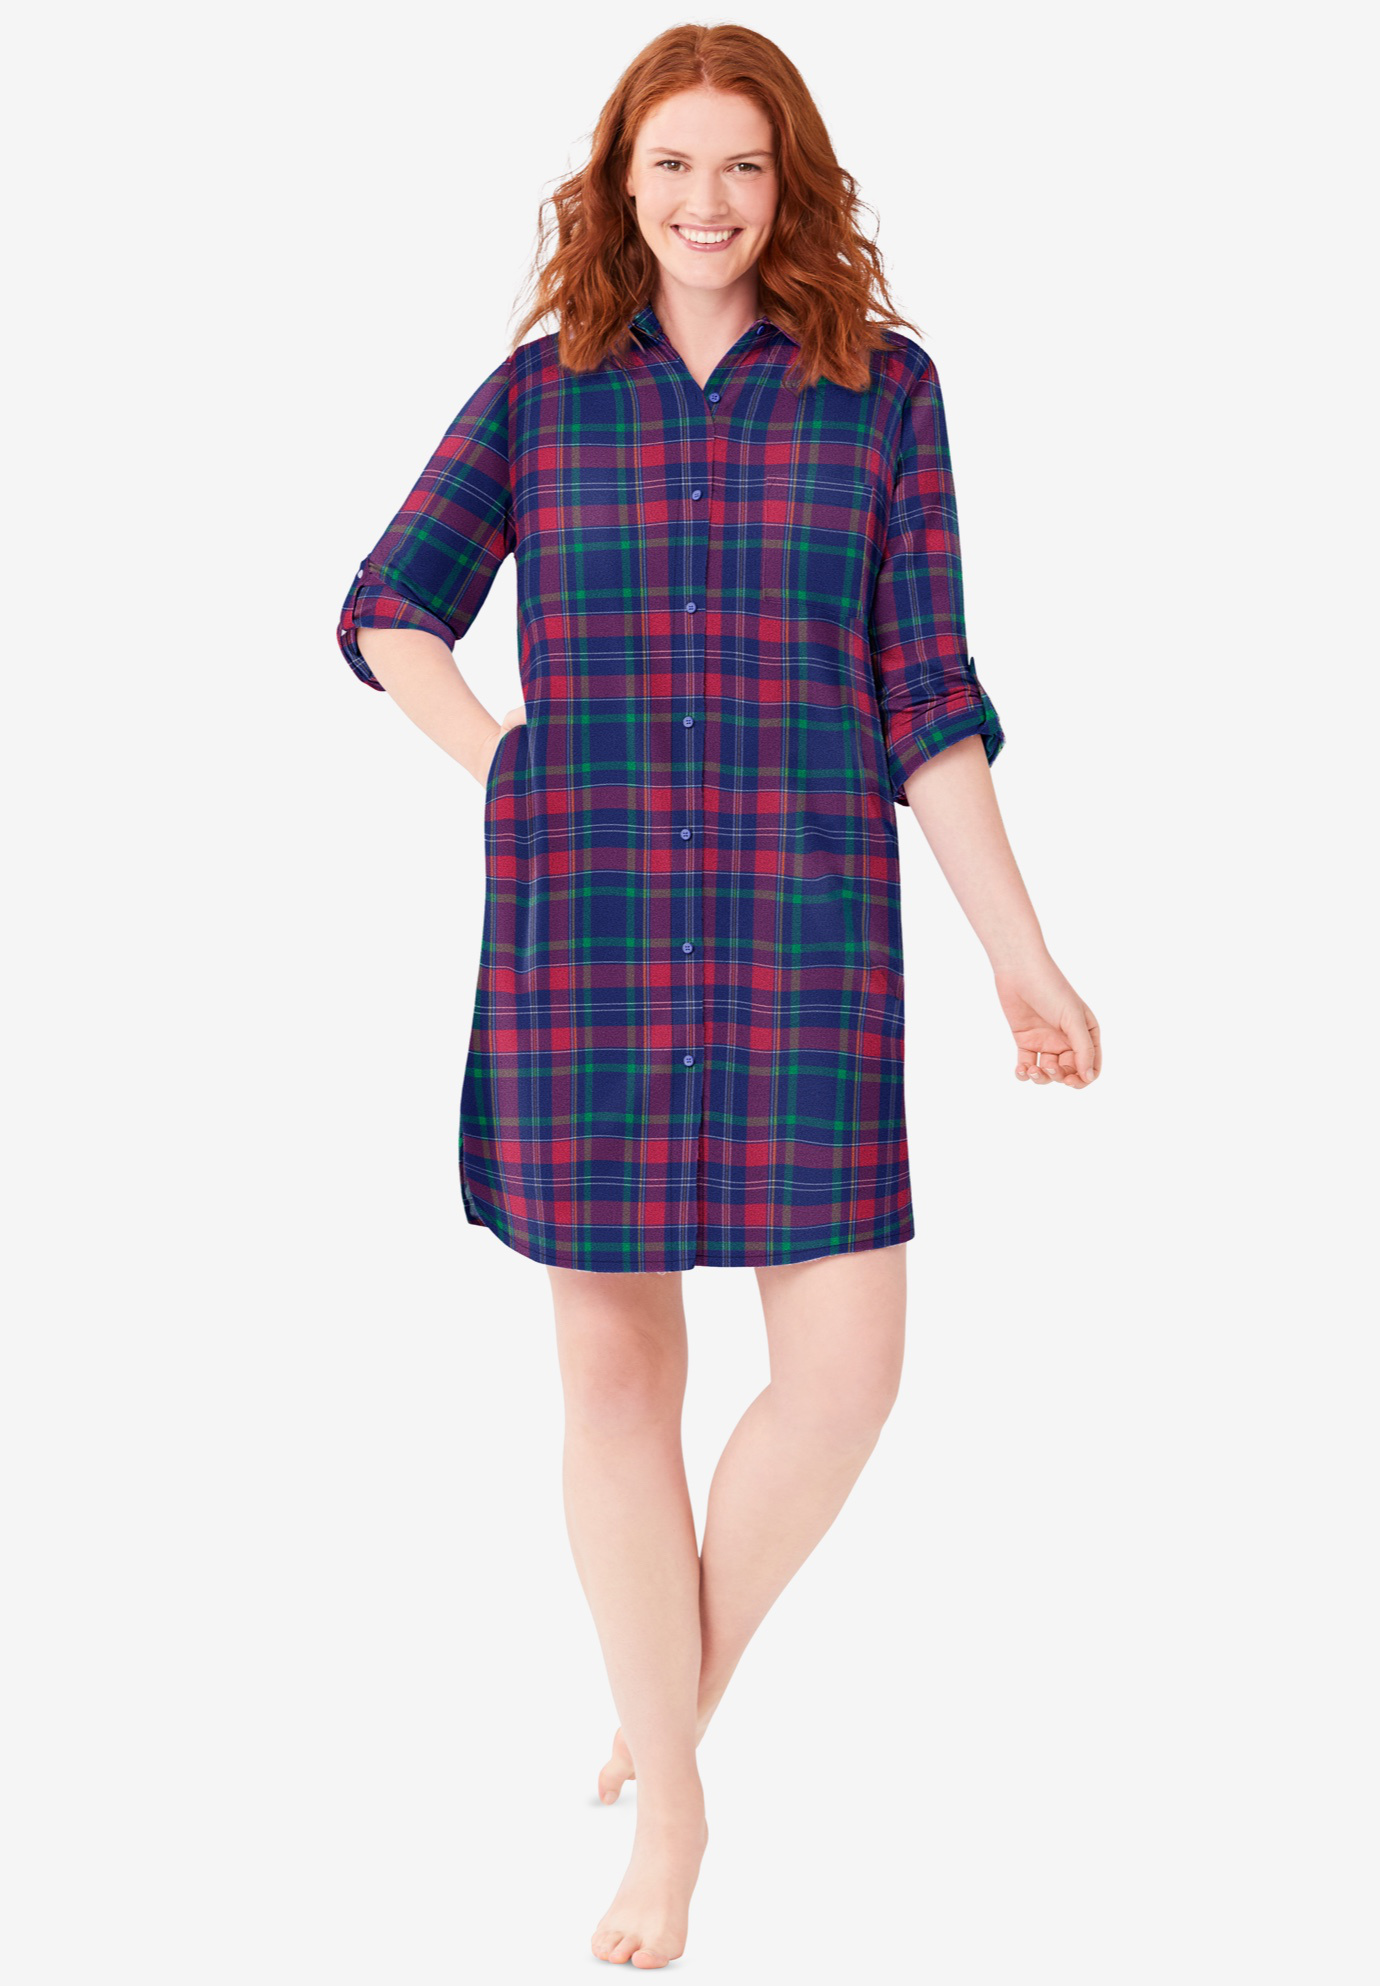 Sleepshirt in plaid flannel with button front, 